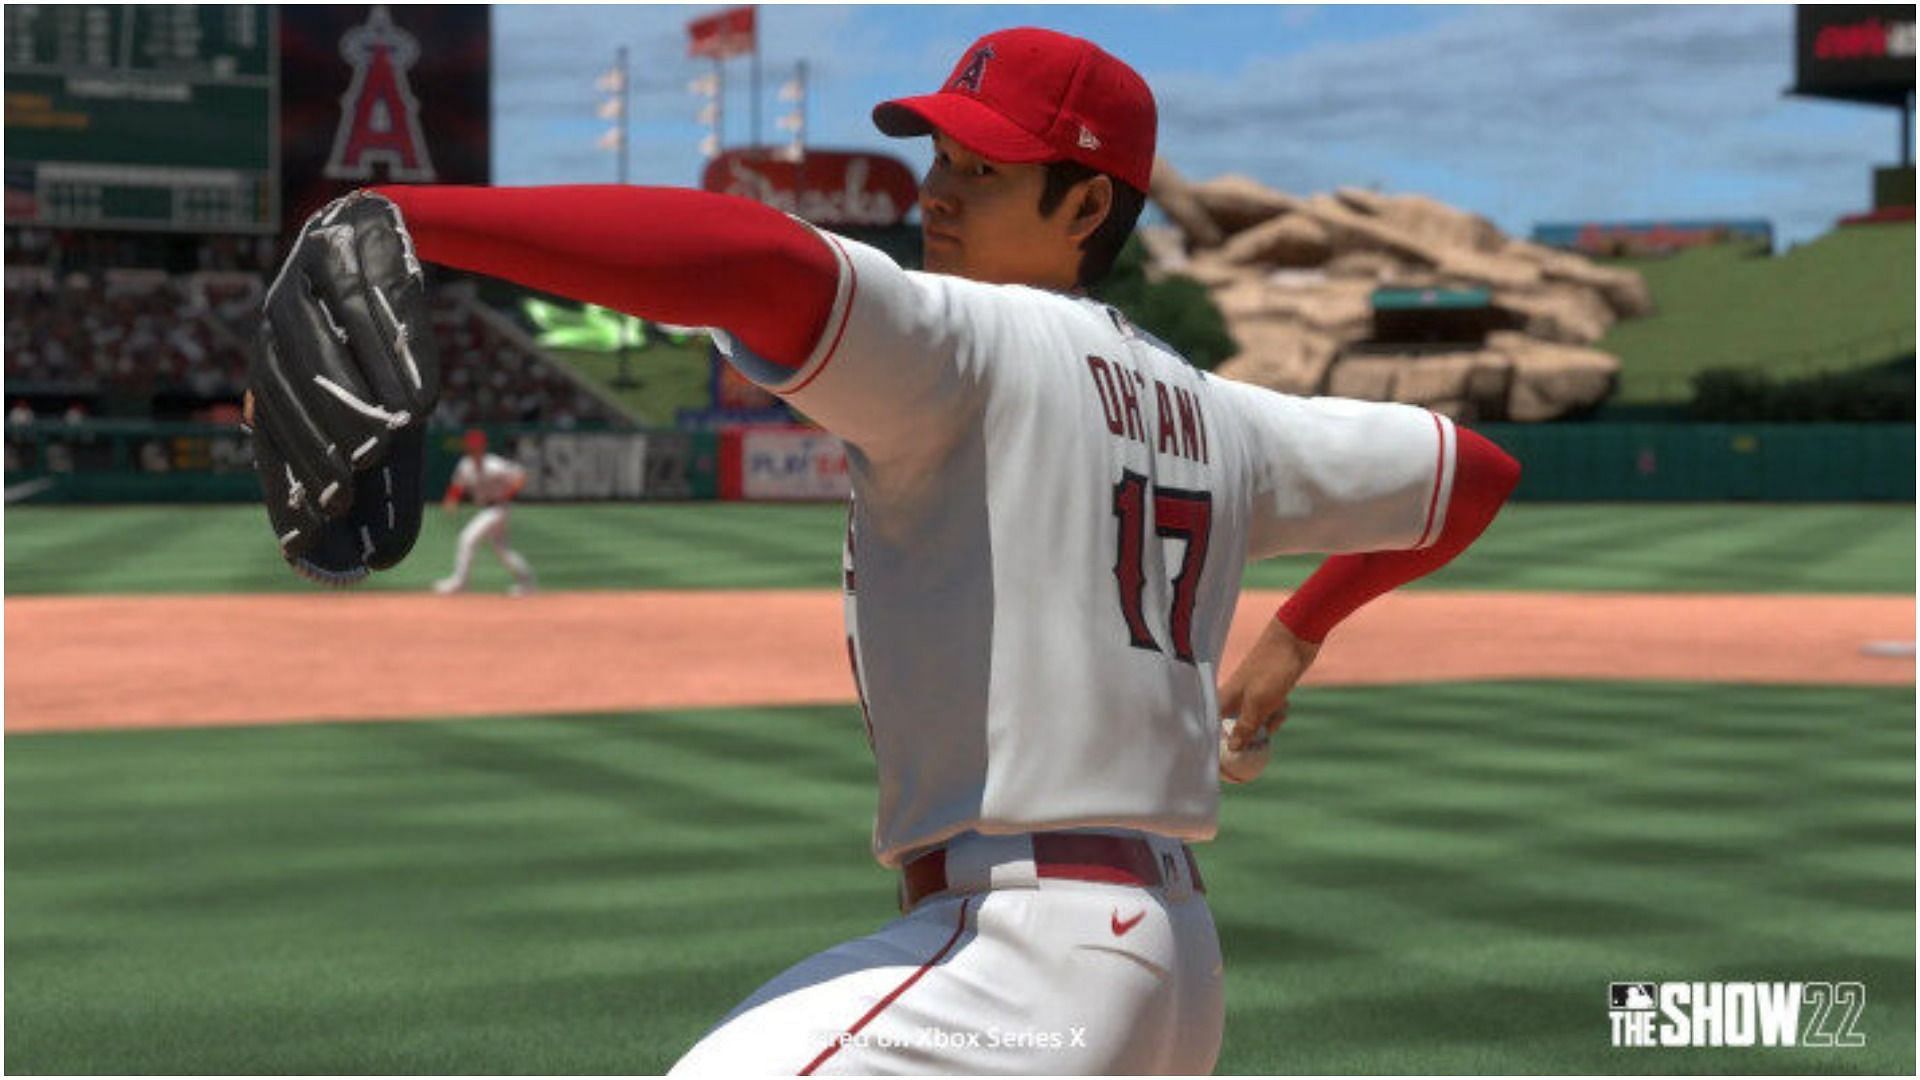 MLB The Show 22 offers different settings to pitch for the players (Image via MLB)